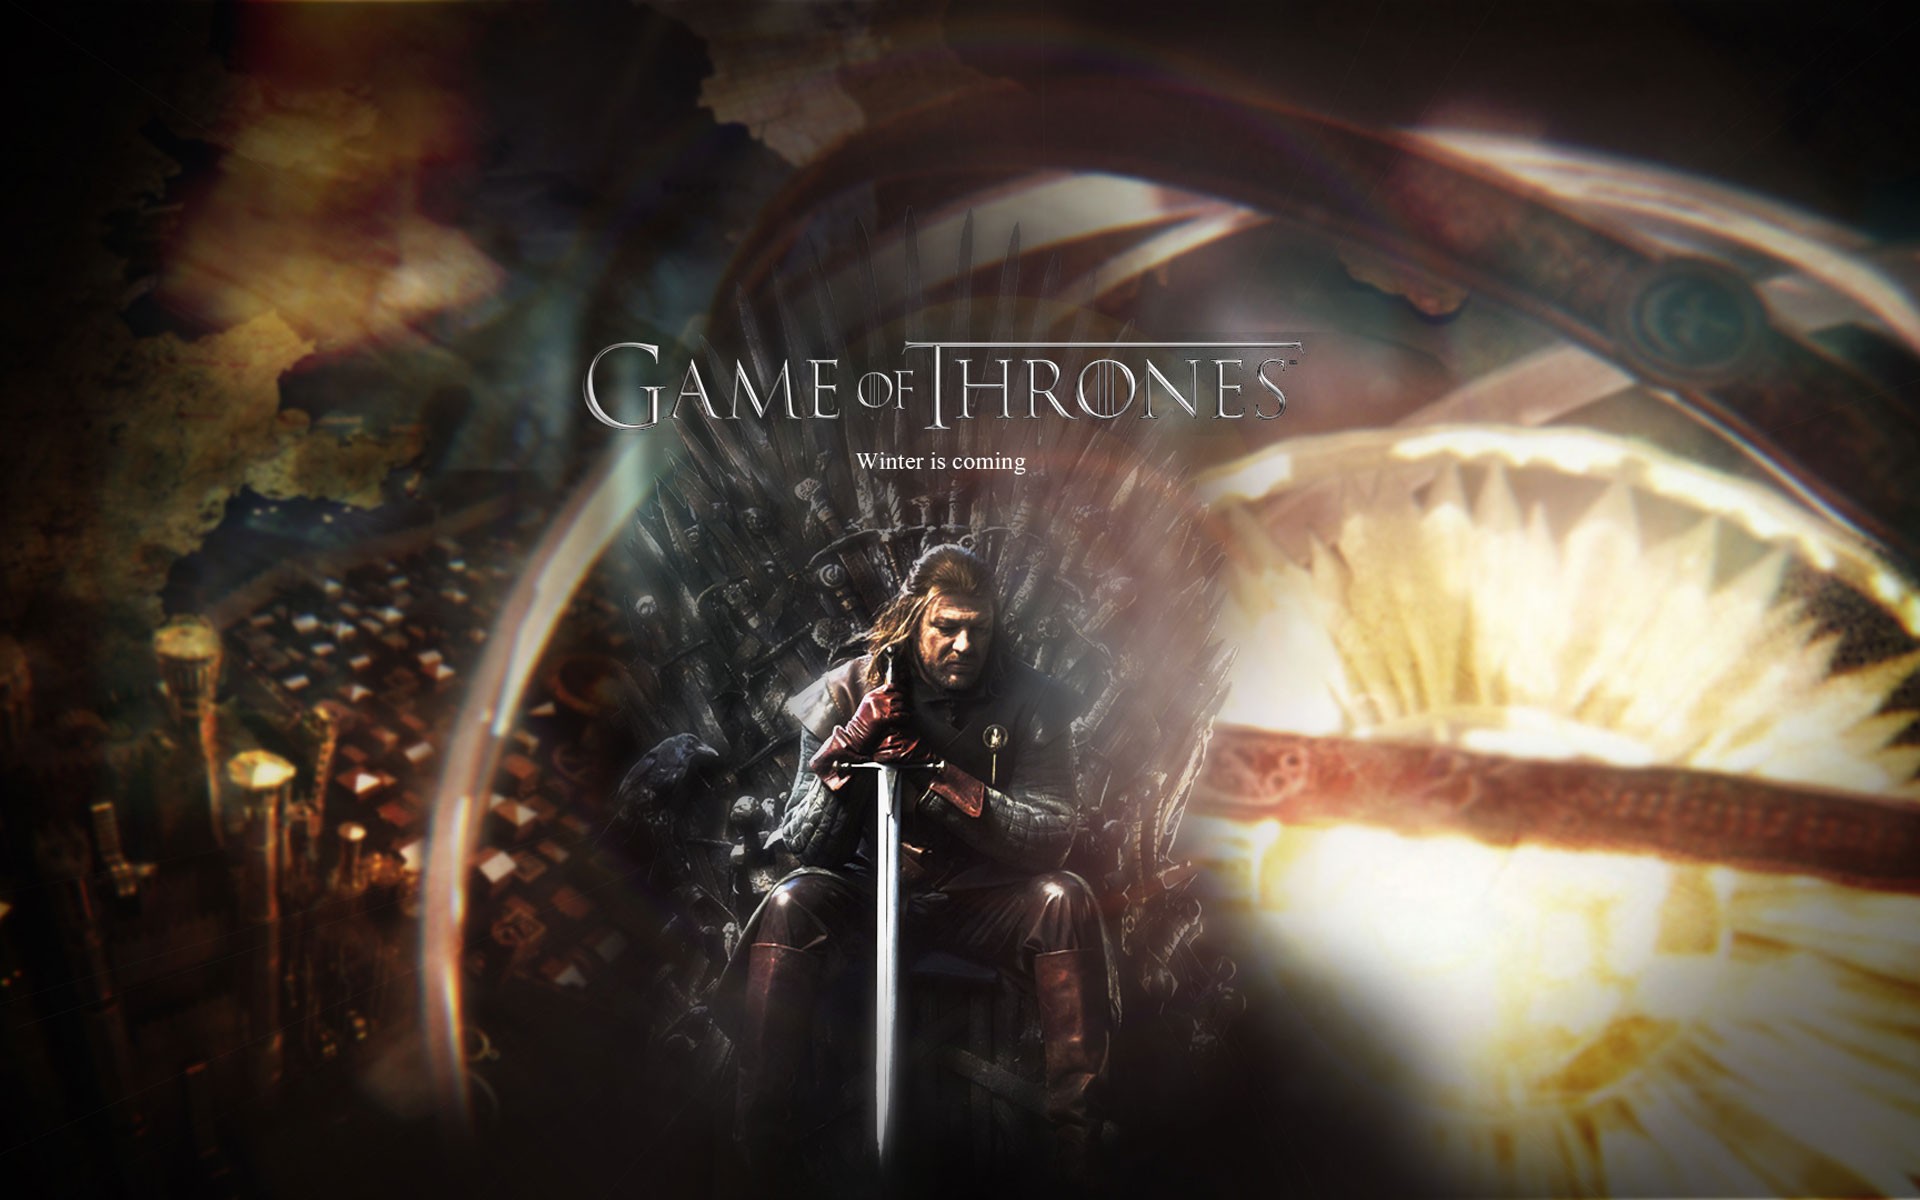 fantasy, Art, Throne, Game, Of, Thrones, A, Song, Of, Ice, And, Fire, Tv, Series, Eddard, And039nedand039, Stark, Hbo, George, R, Wallpaper